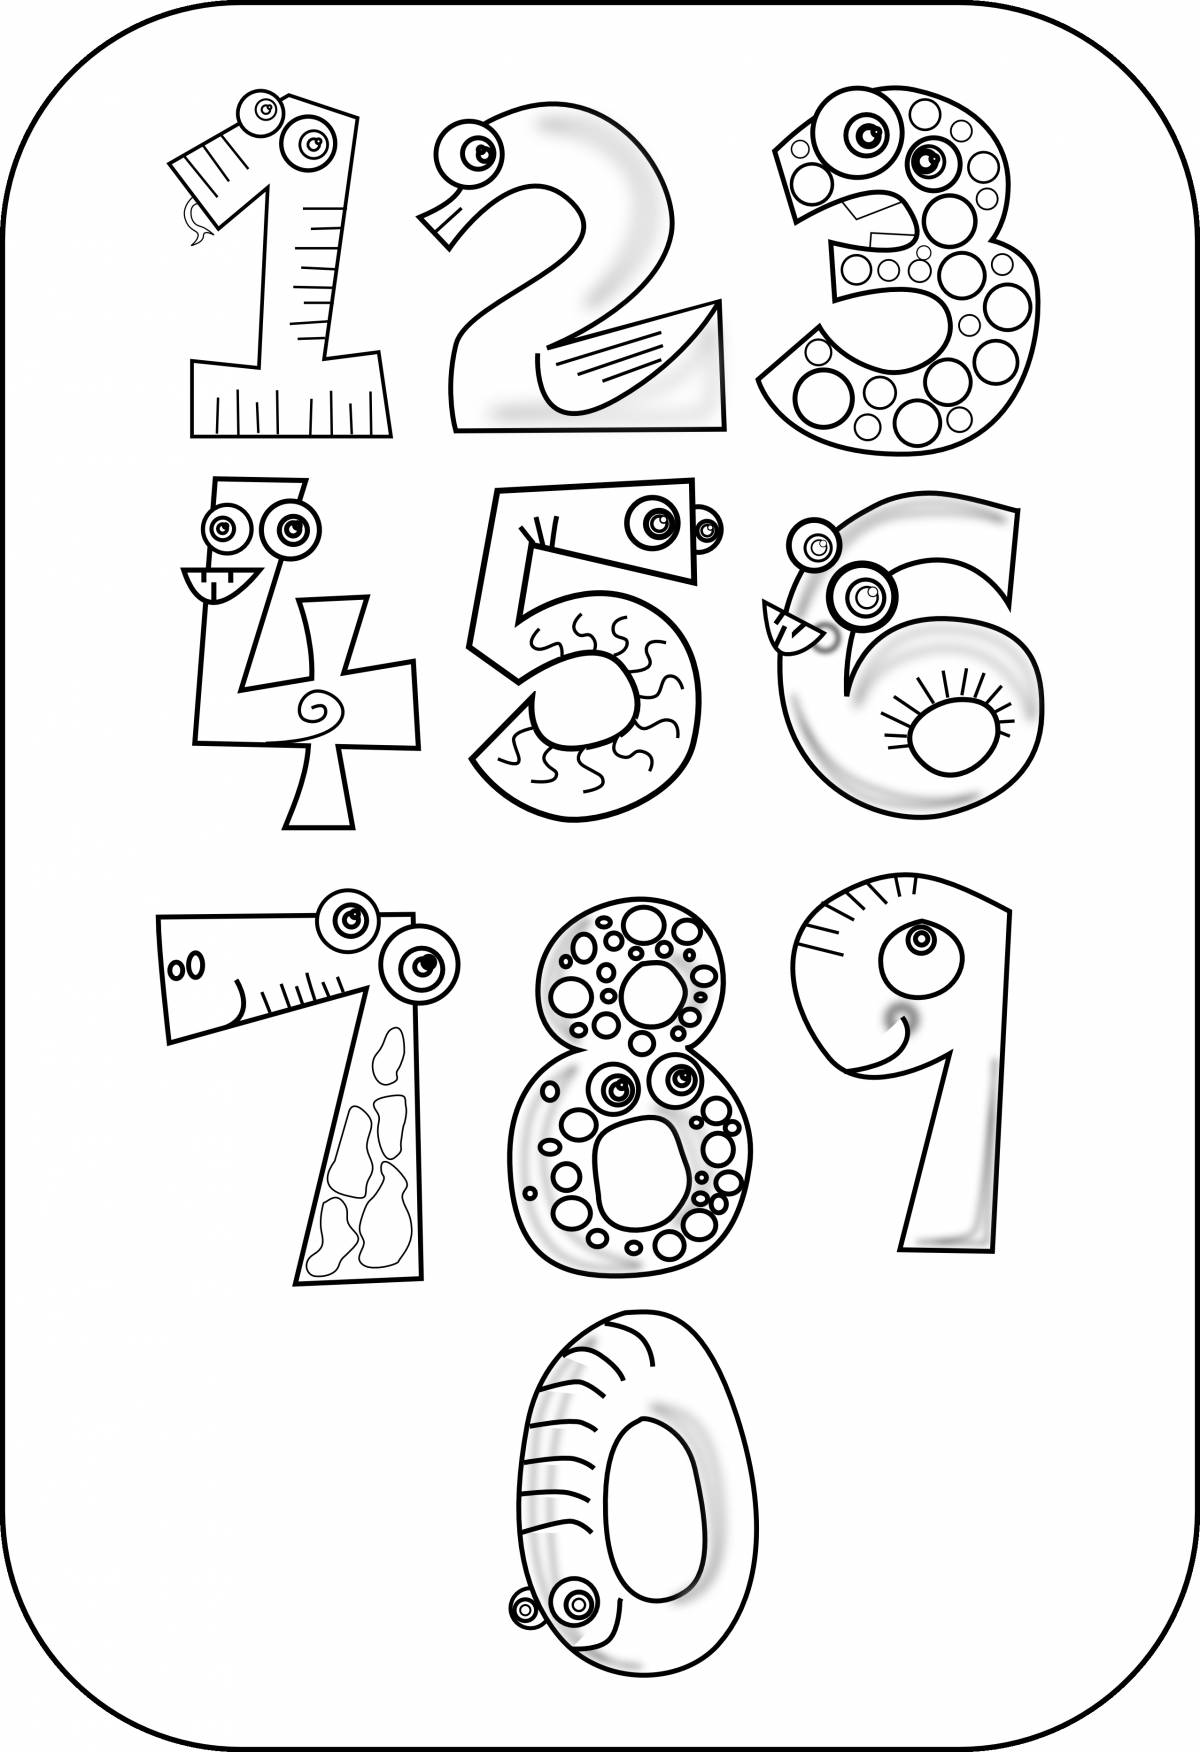 Sparkling living figures coloring book